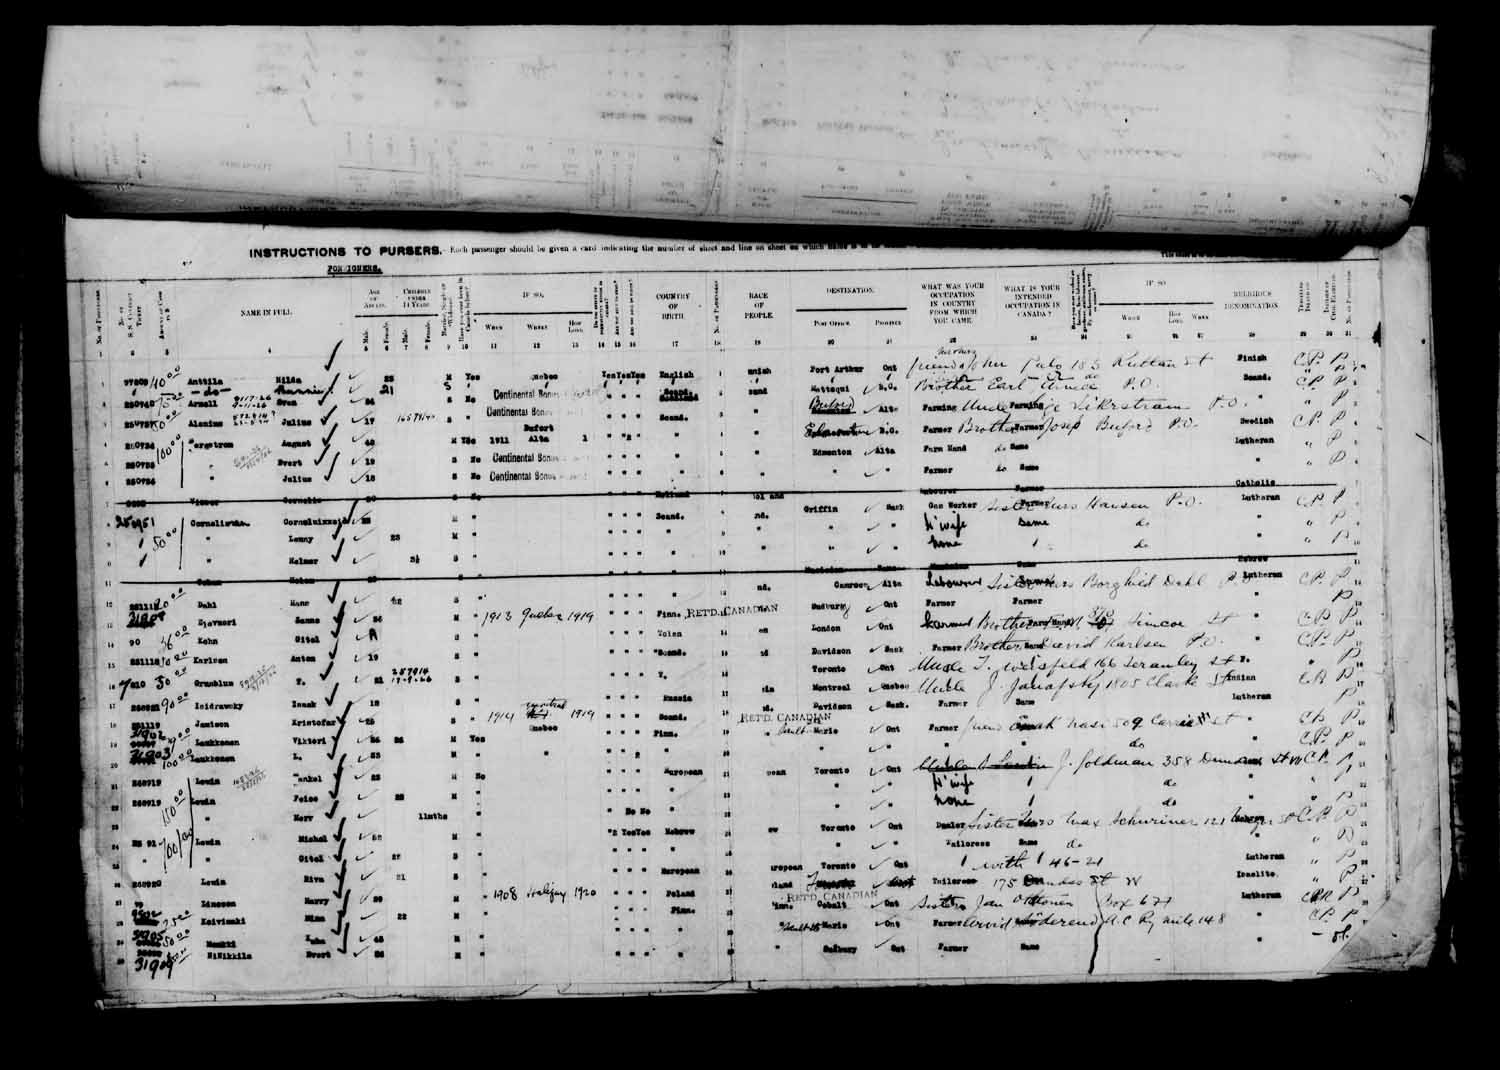 Digitized page of Passenger Lists for Image No.: e003610674